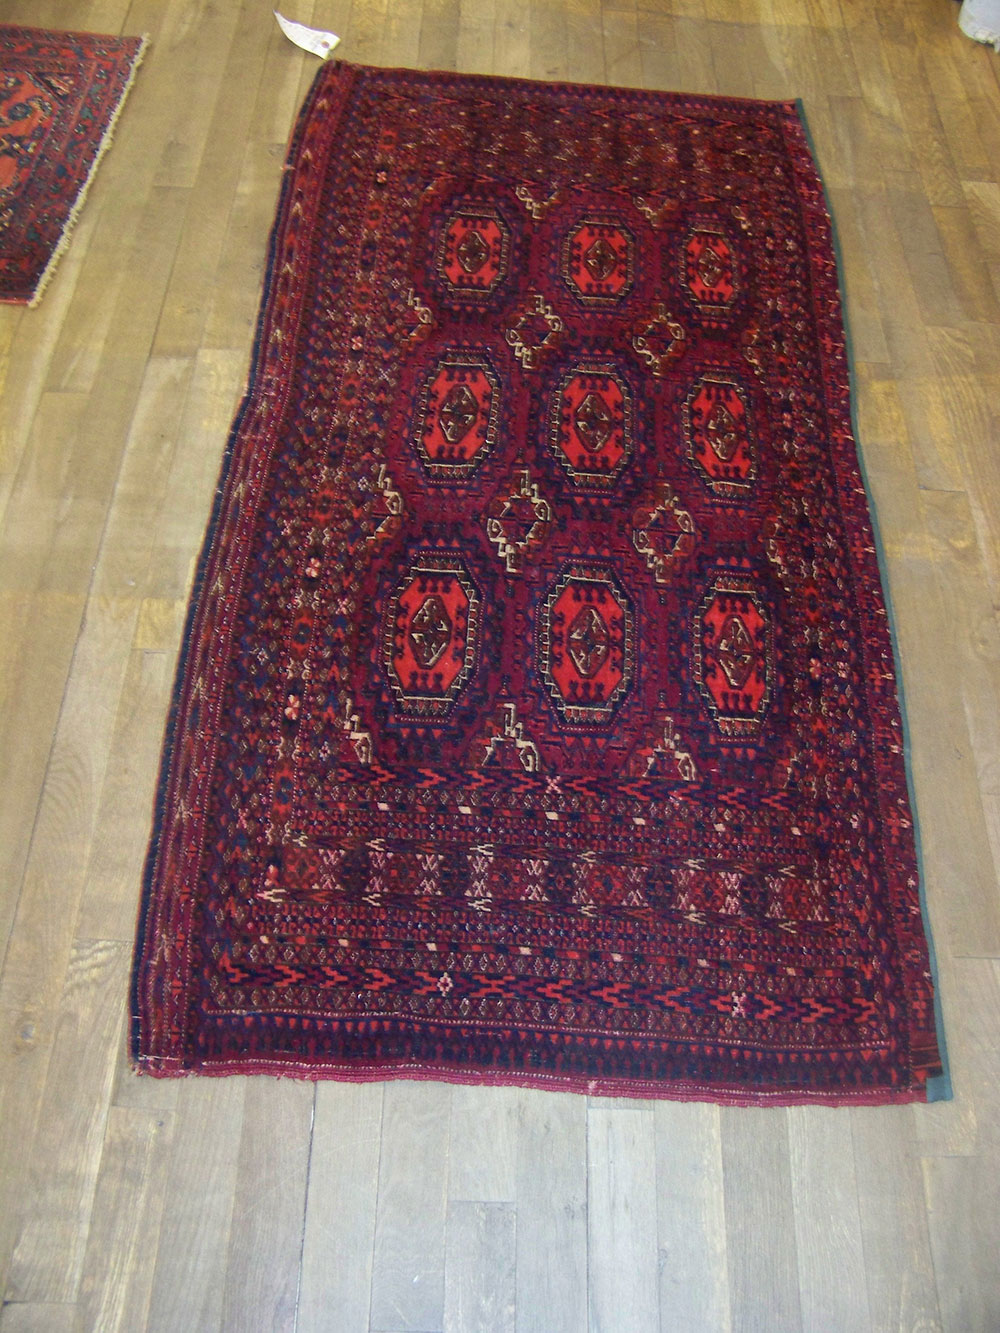 Item Number: 21645
Size: 2 ft 05 in  x 5 ft  in